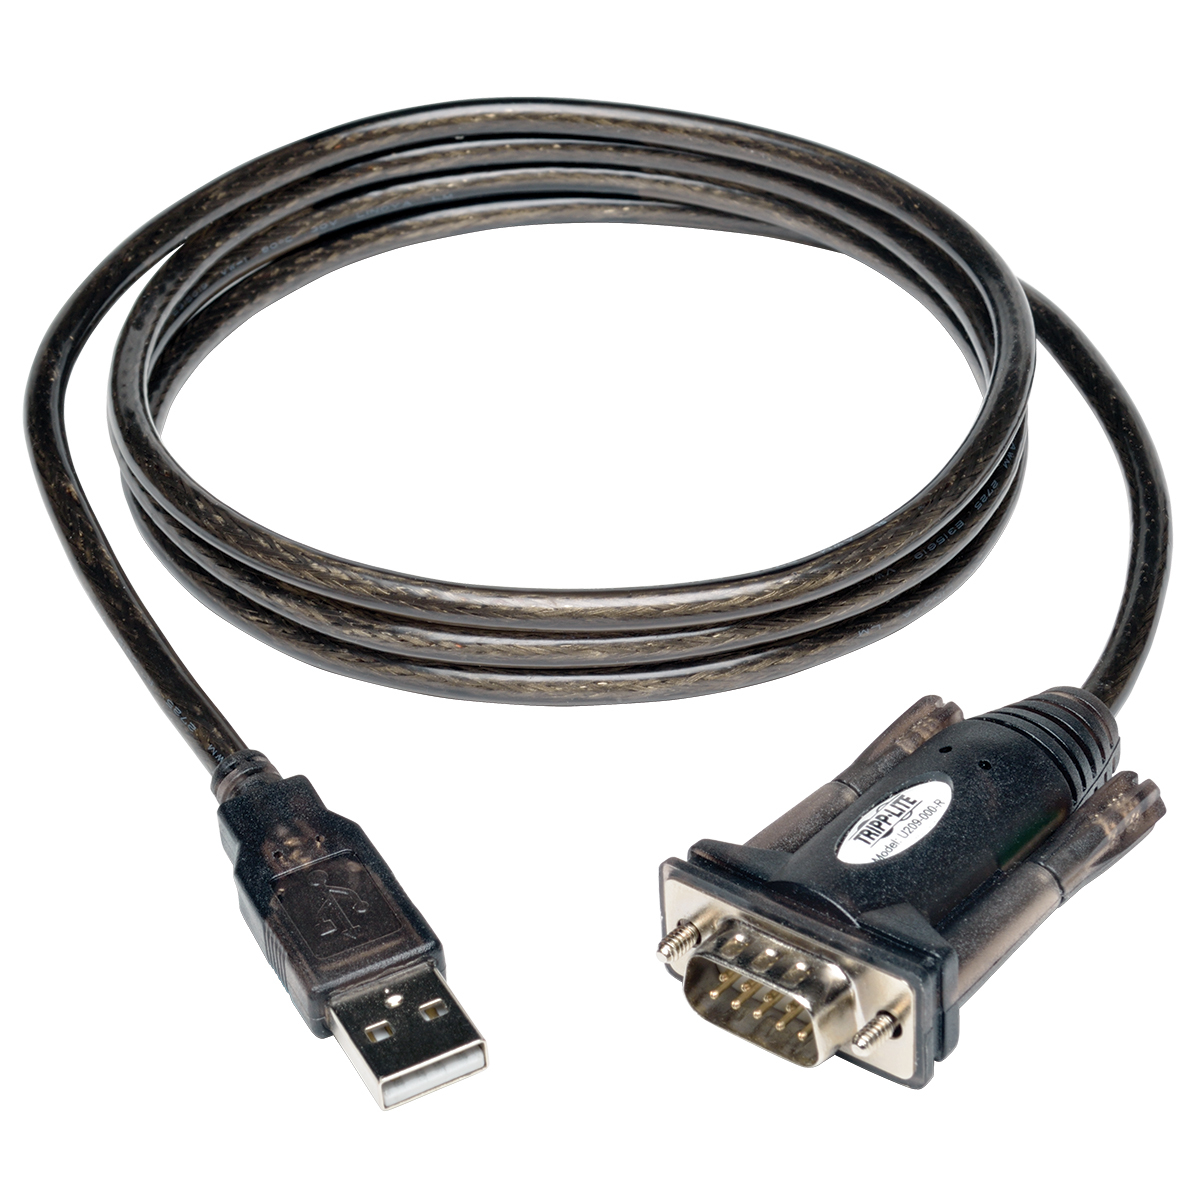 C2g usb to serial adapter cable